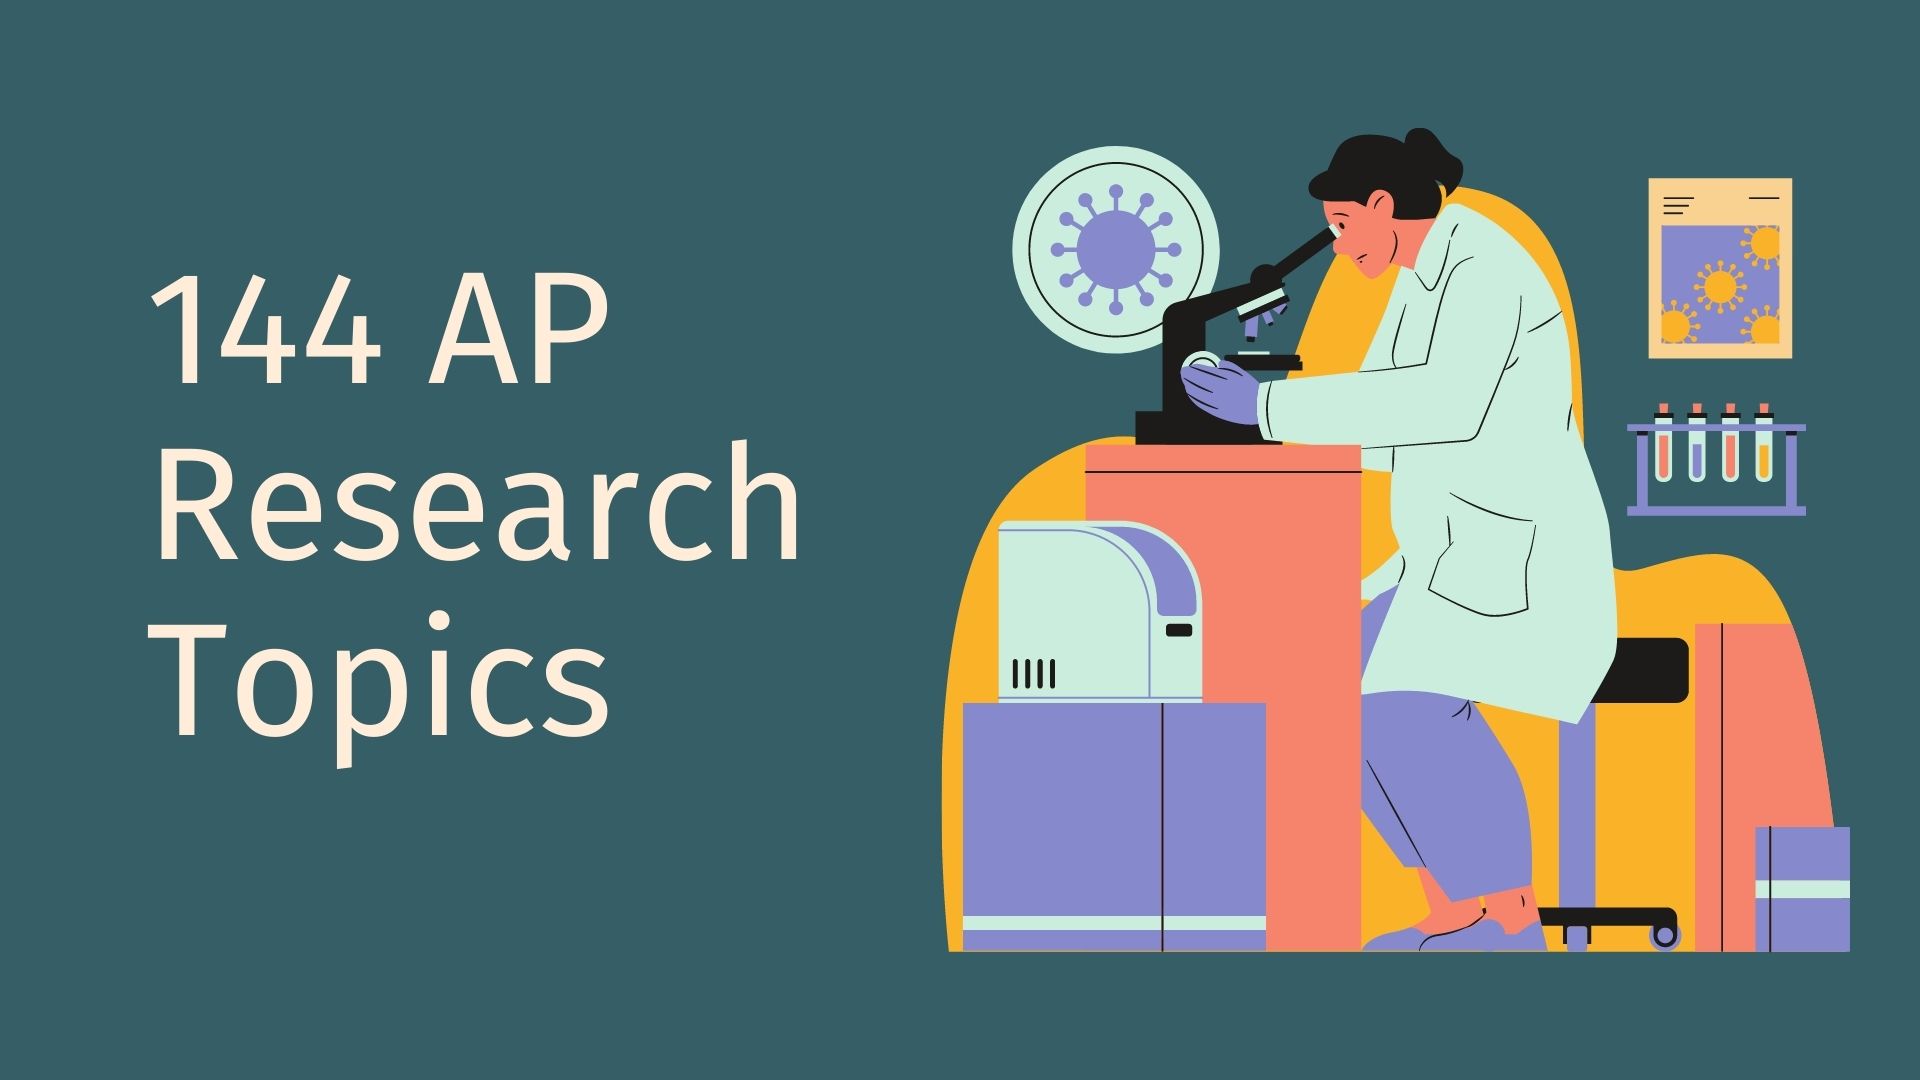 144 AP Research Topics For Your Excellence